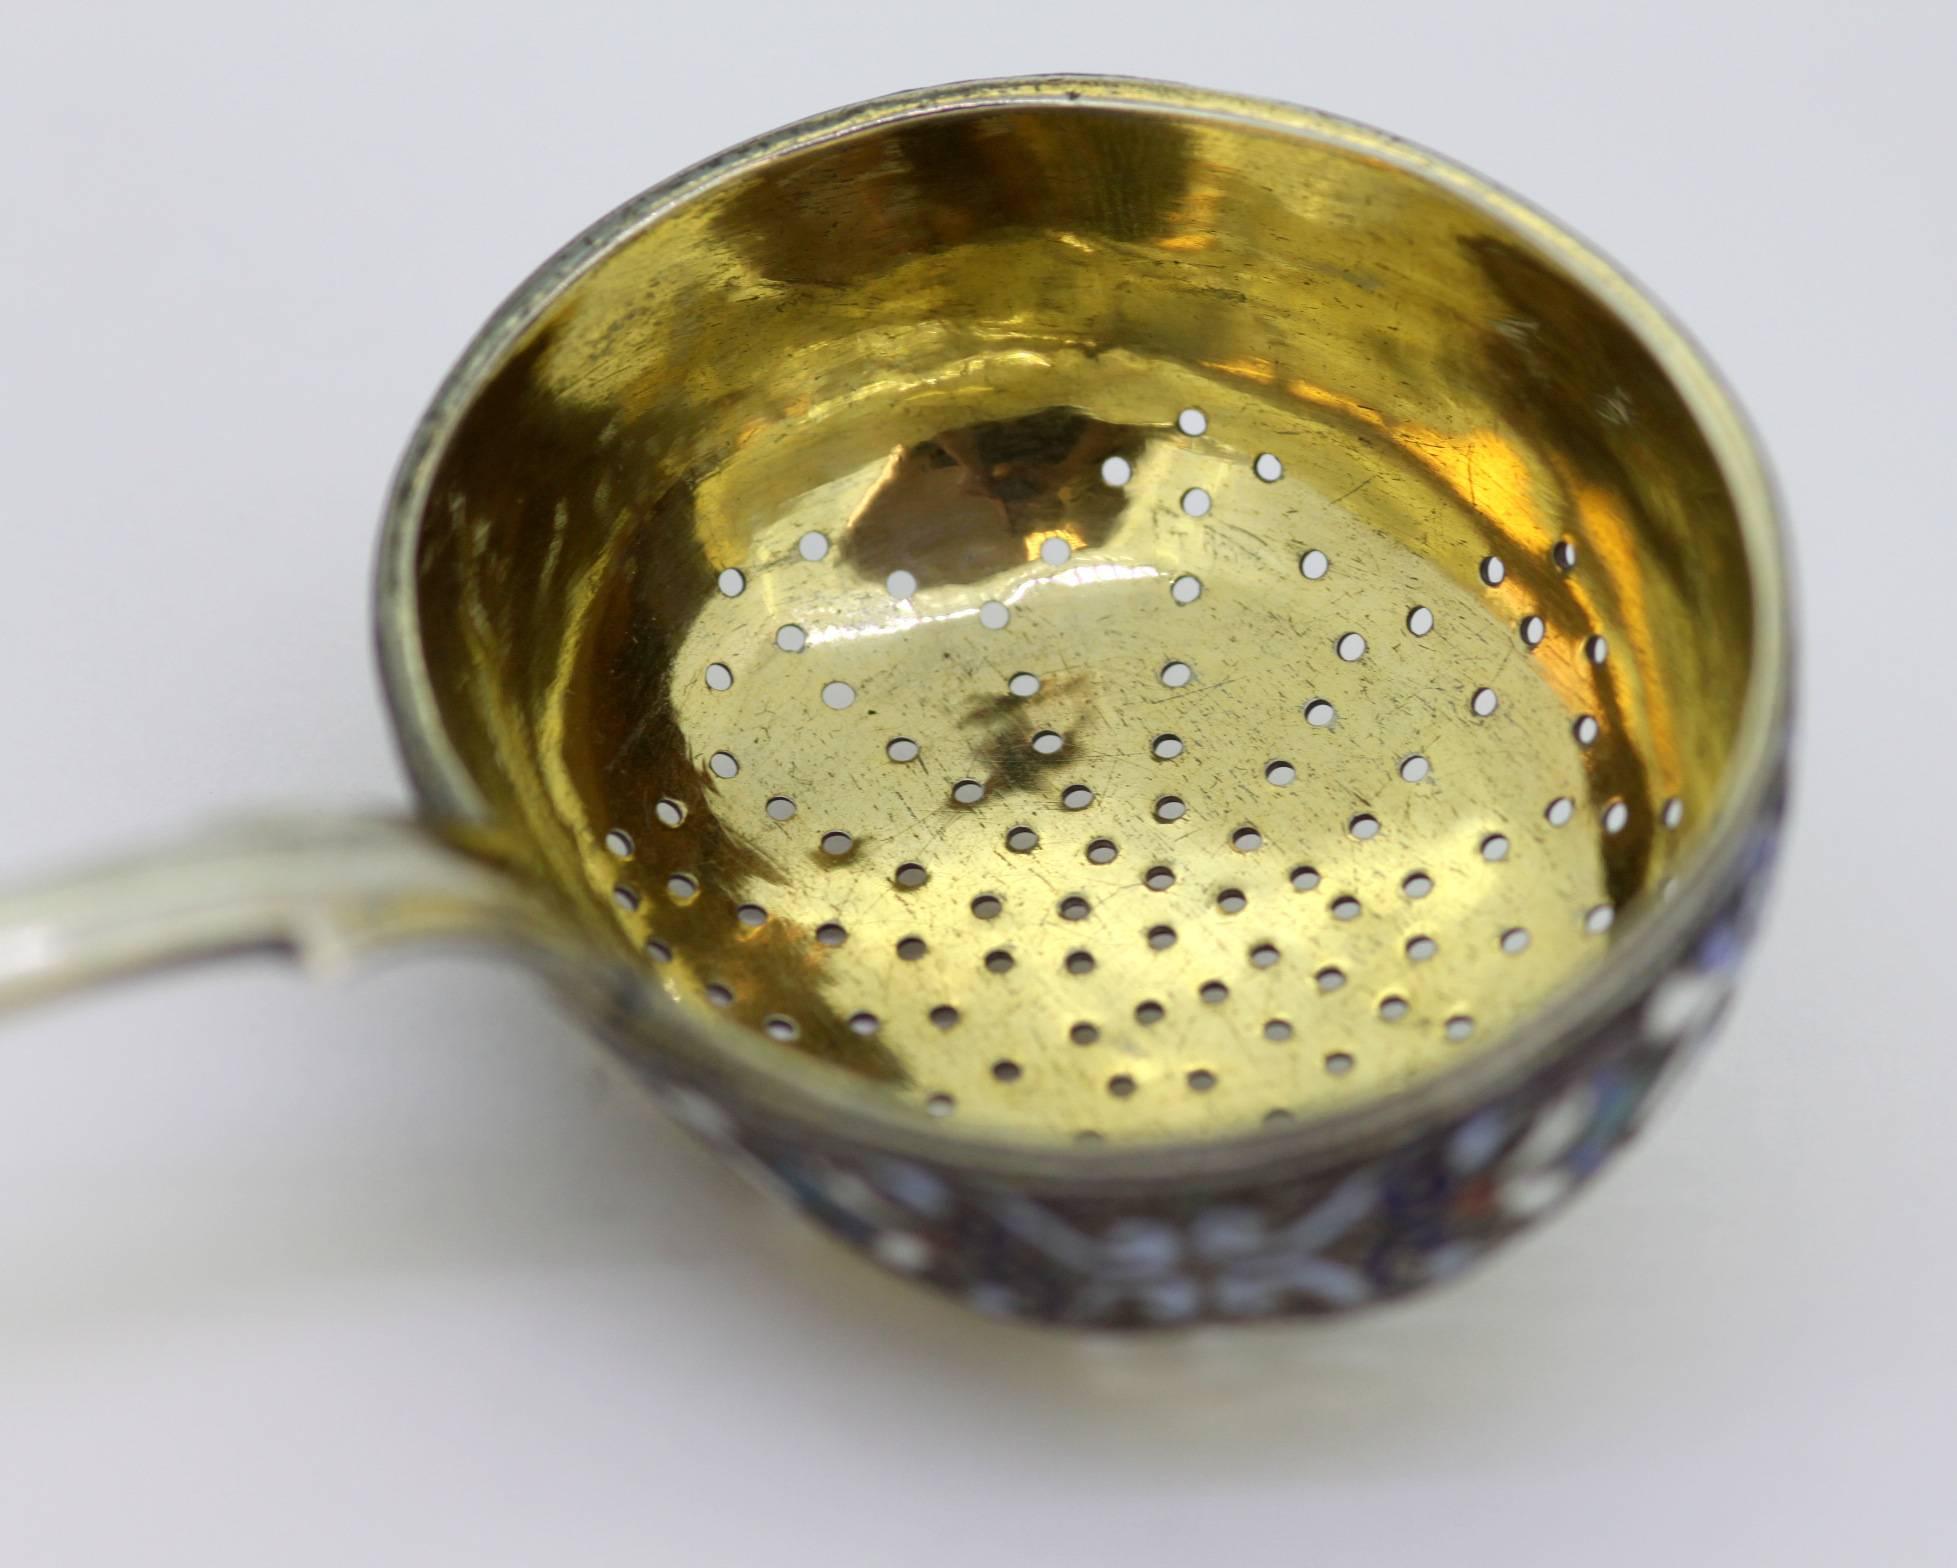 Late 19th Century Antique Russian Silver and Enamel Tea Strainer, St. Petersburg, 1890